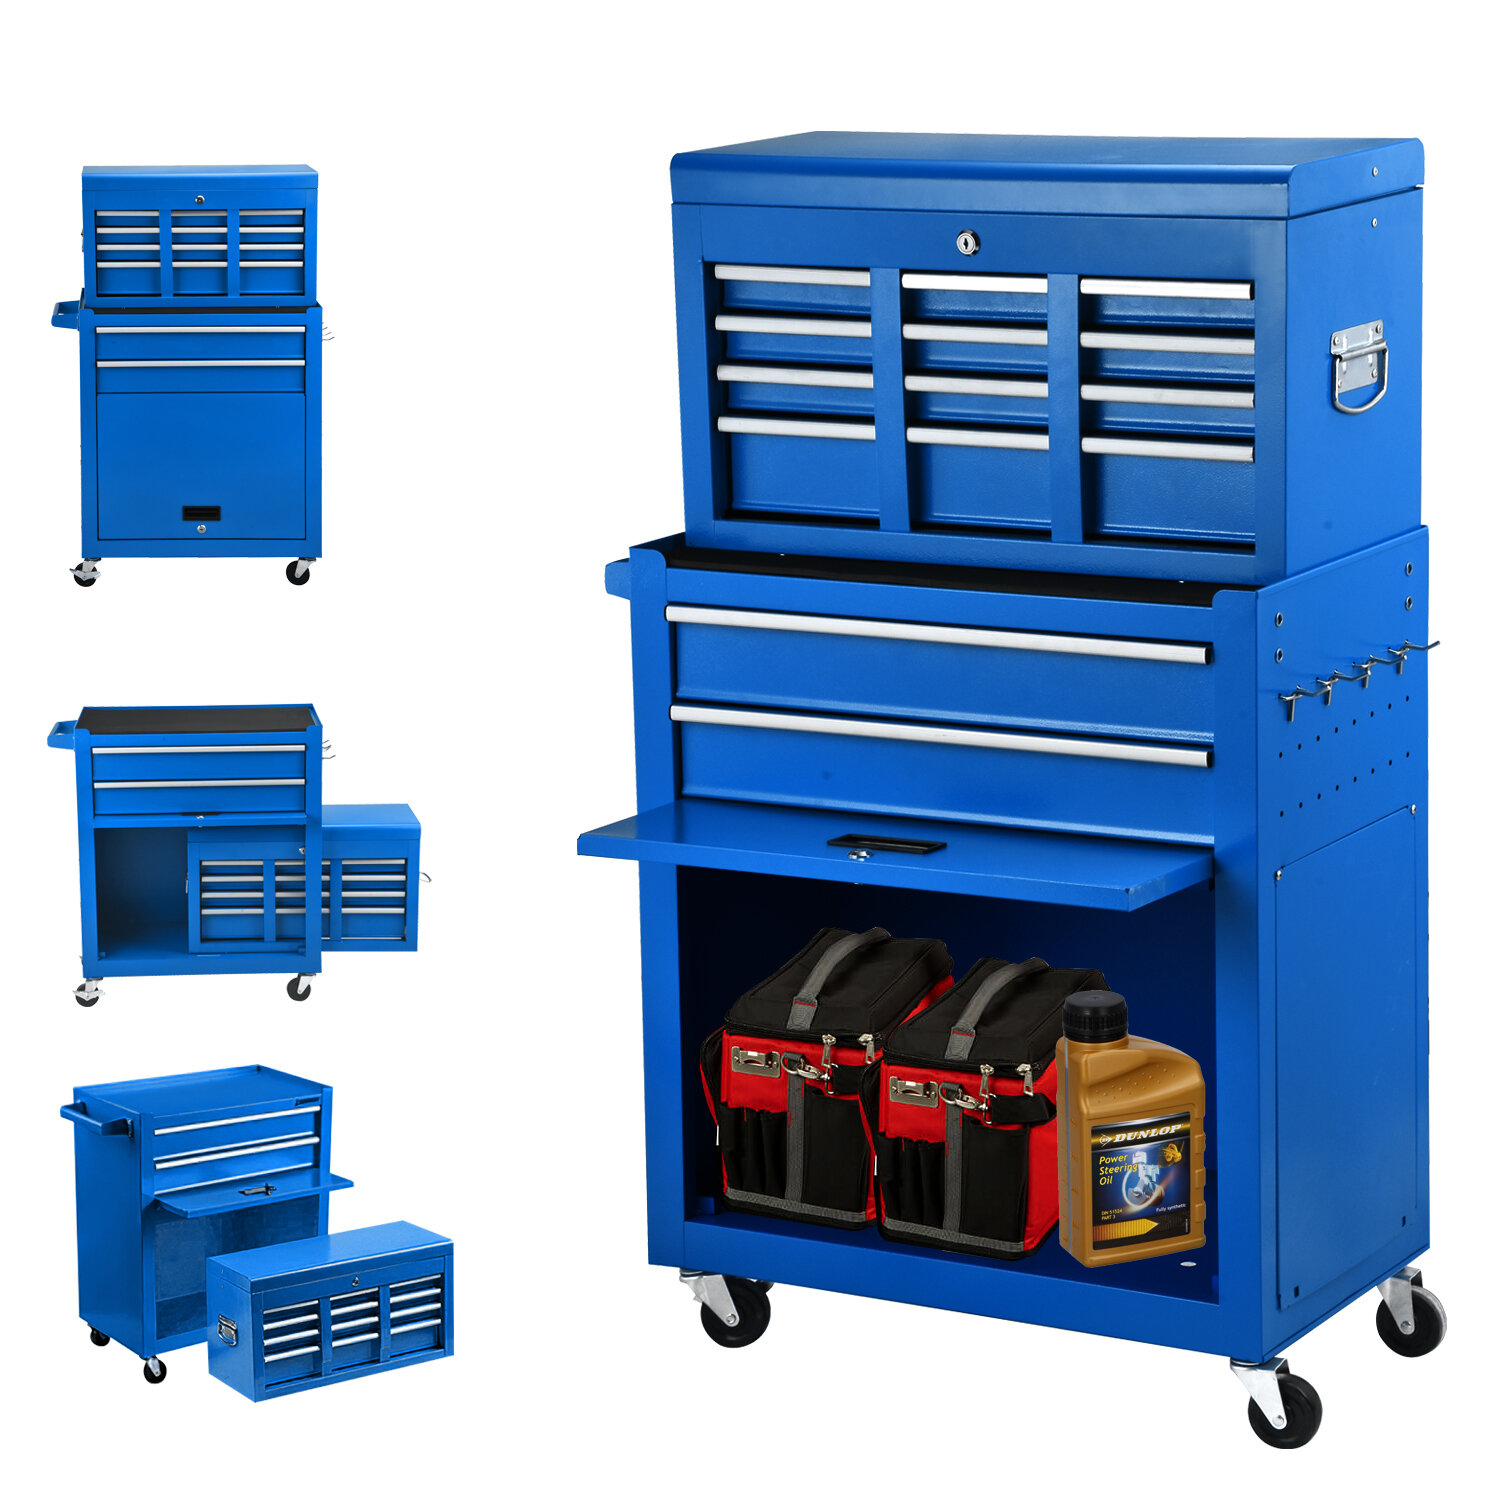 Stalwart 11 Rack System Tool Box with 4 Organizers